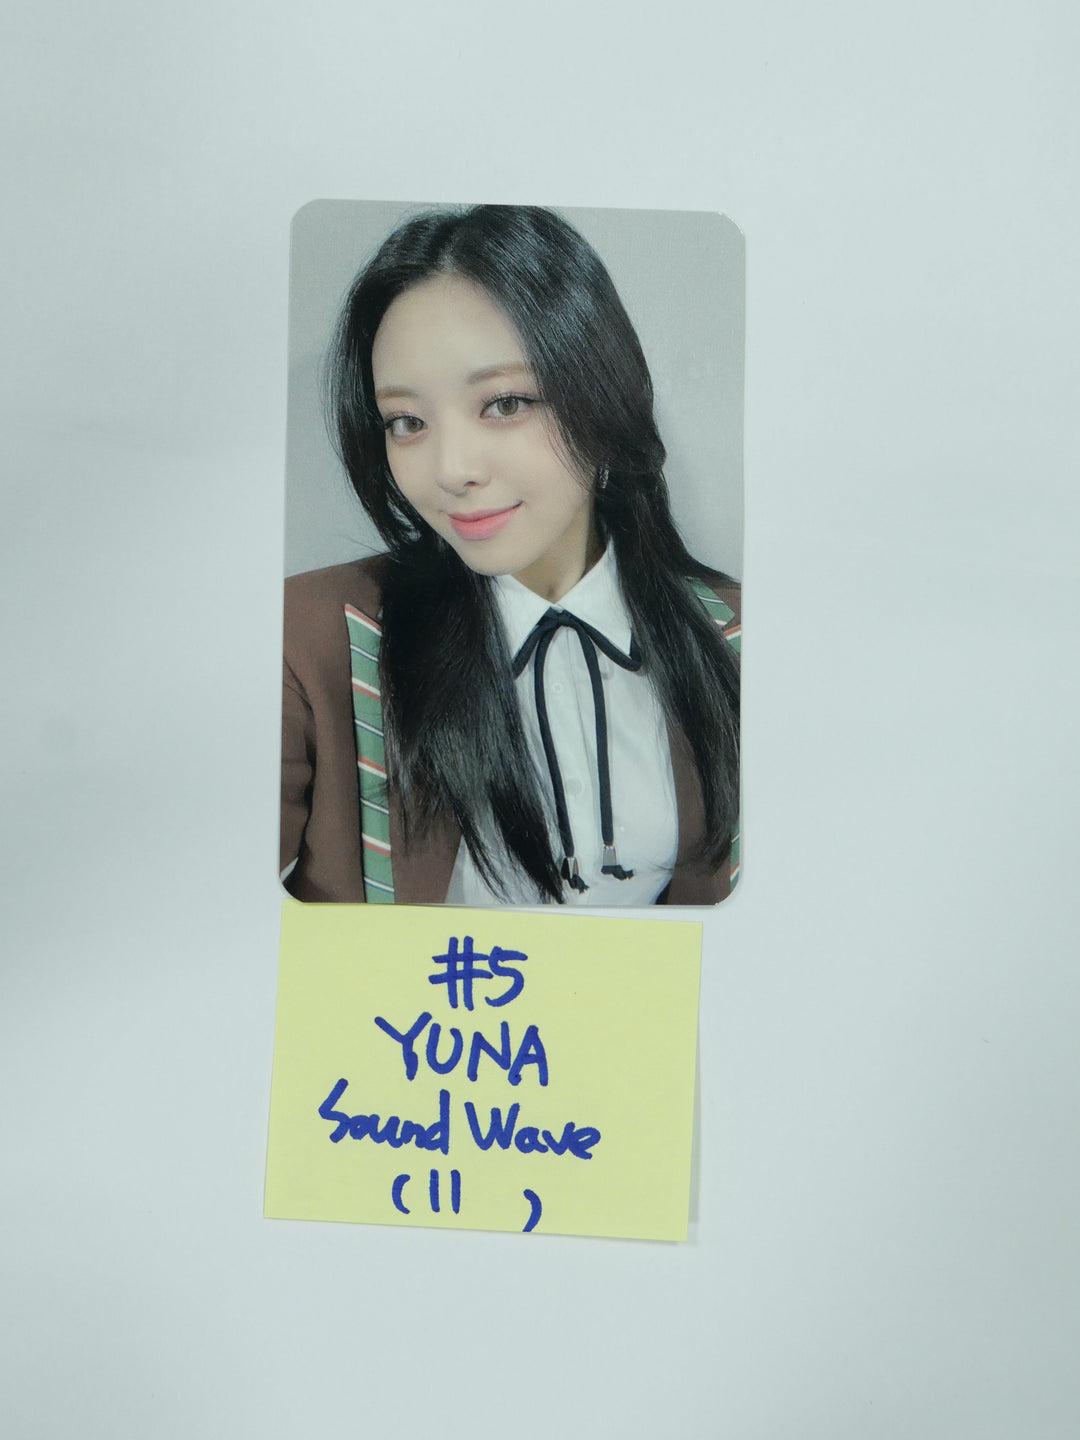 ITZY ‘CRAZY IN LOVE’ - Soundwave Fansign Event Photocard & 4 Cut Photo